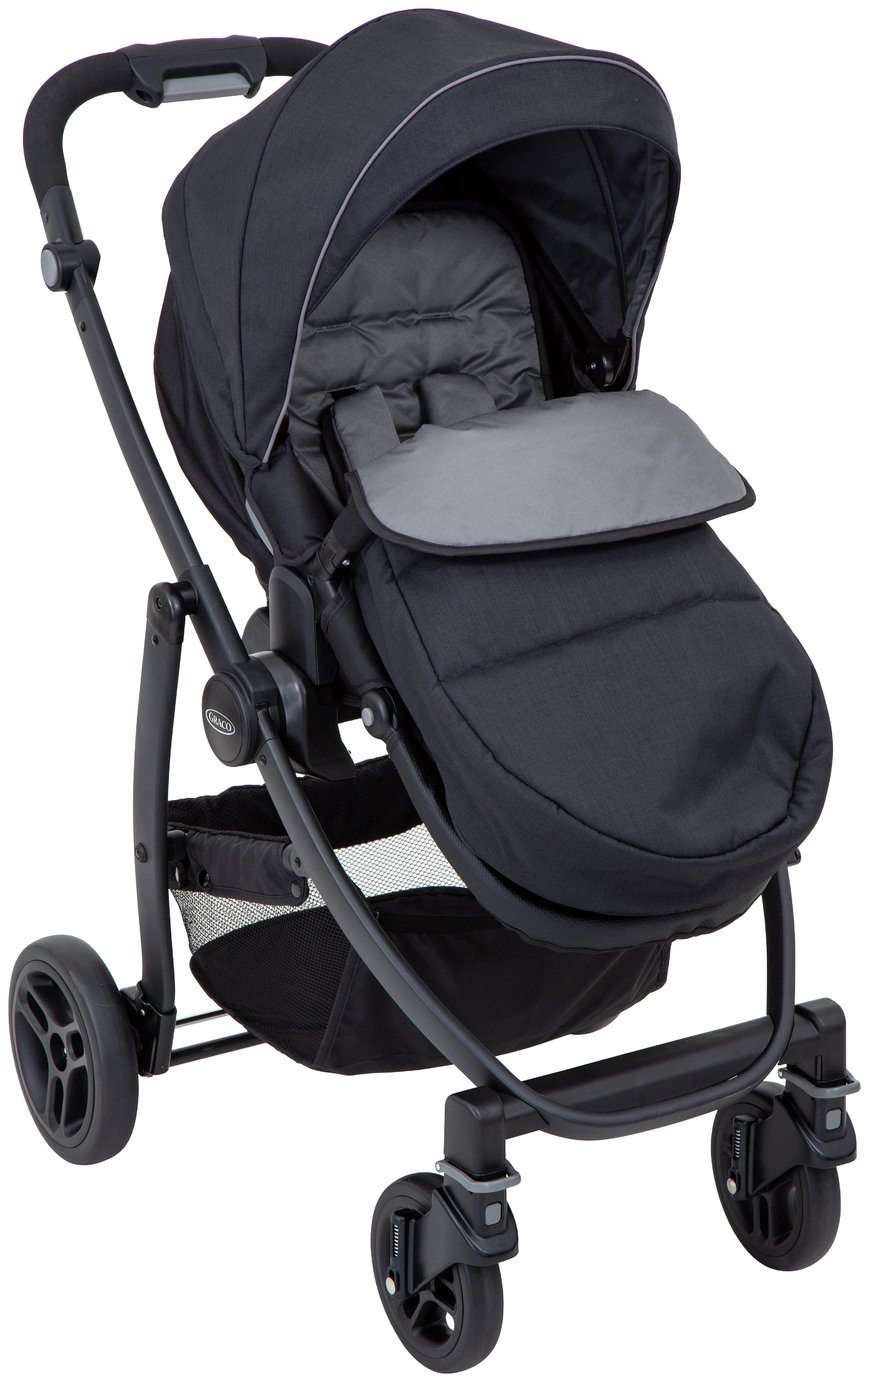 Graco Pushchairs and Strollers Deals & Sale - Cheapest Prices from